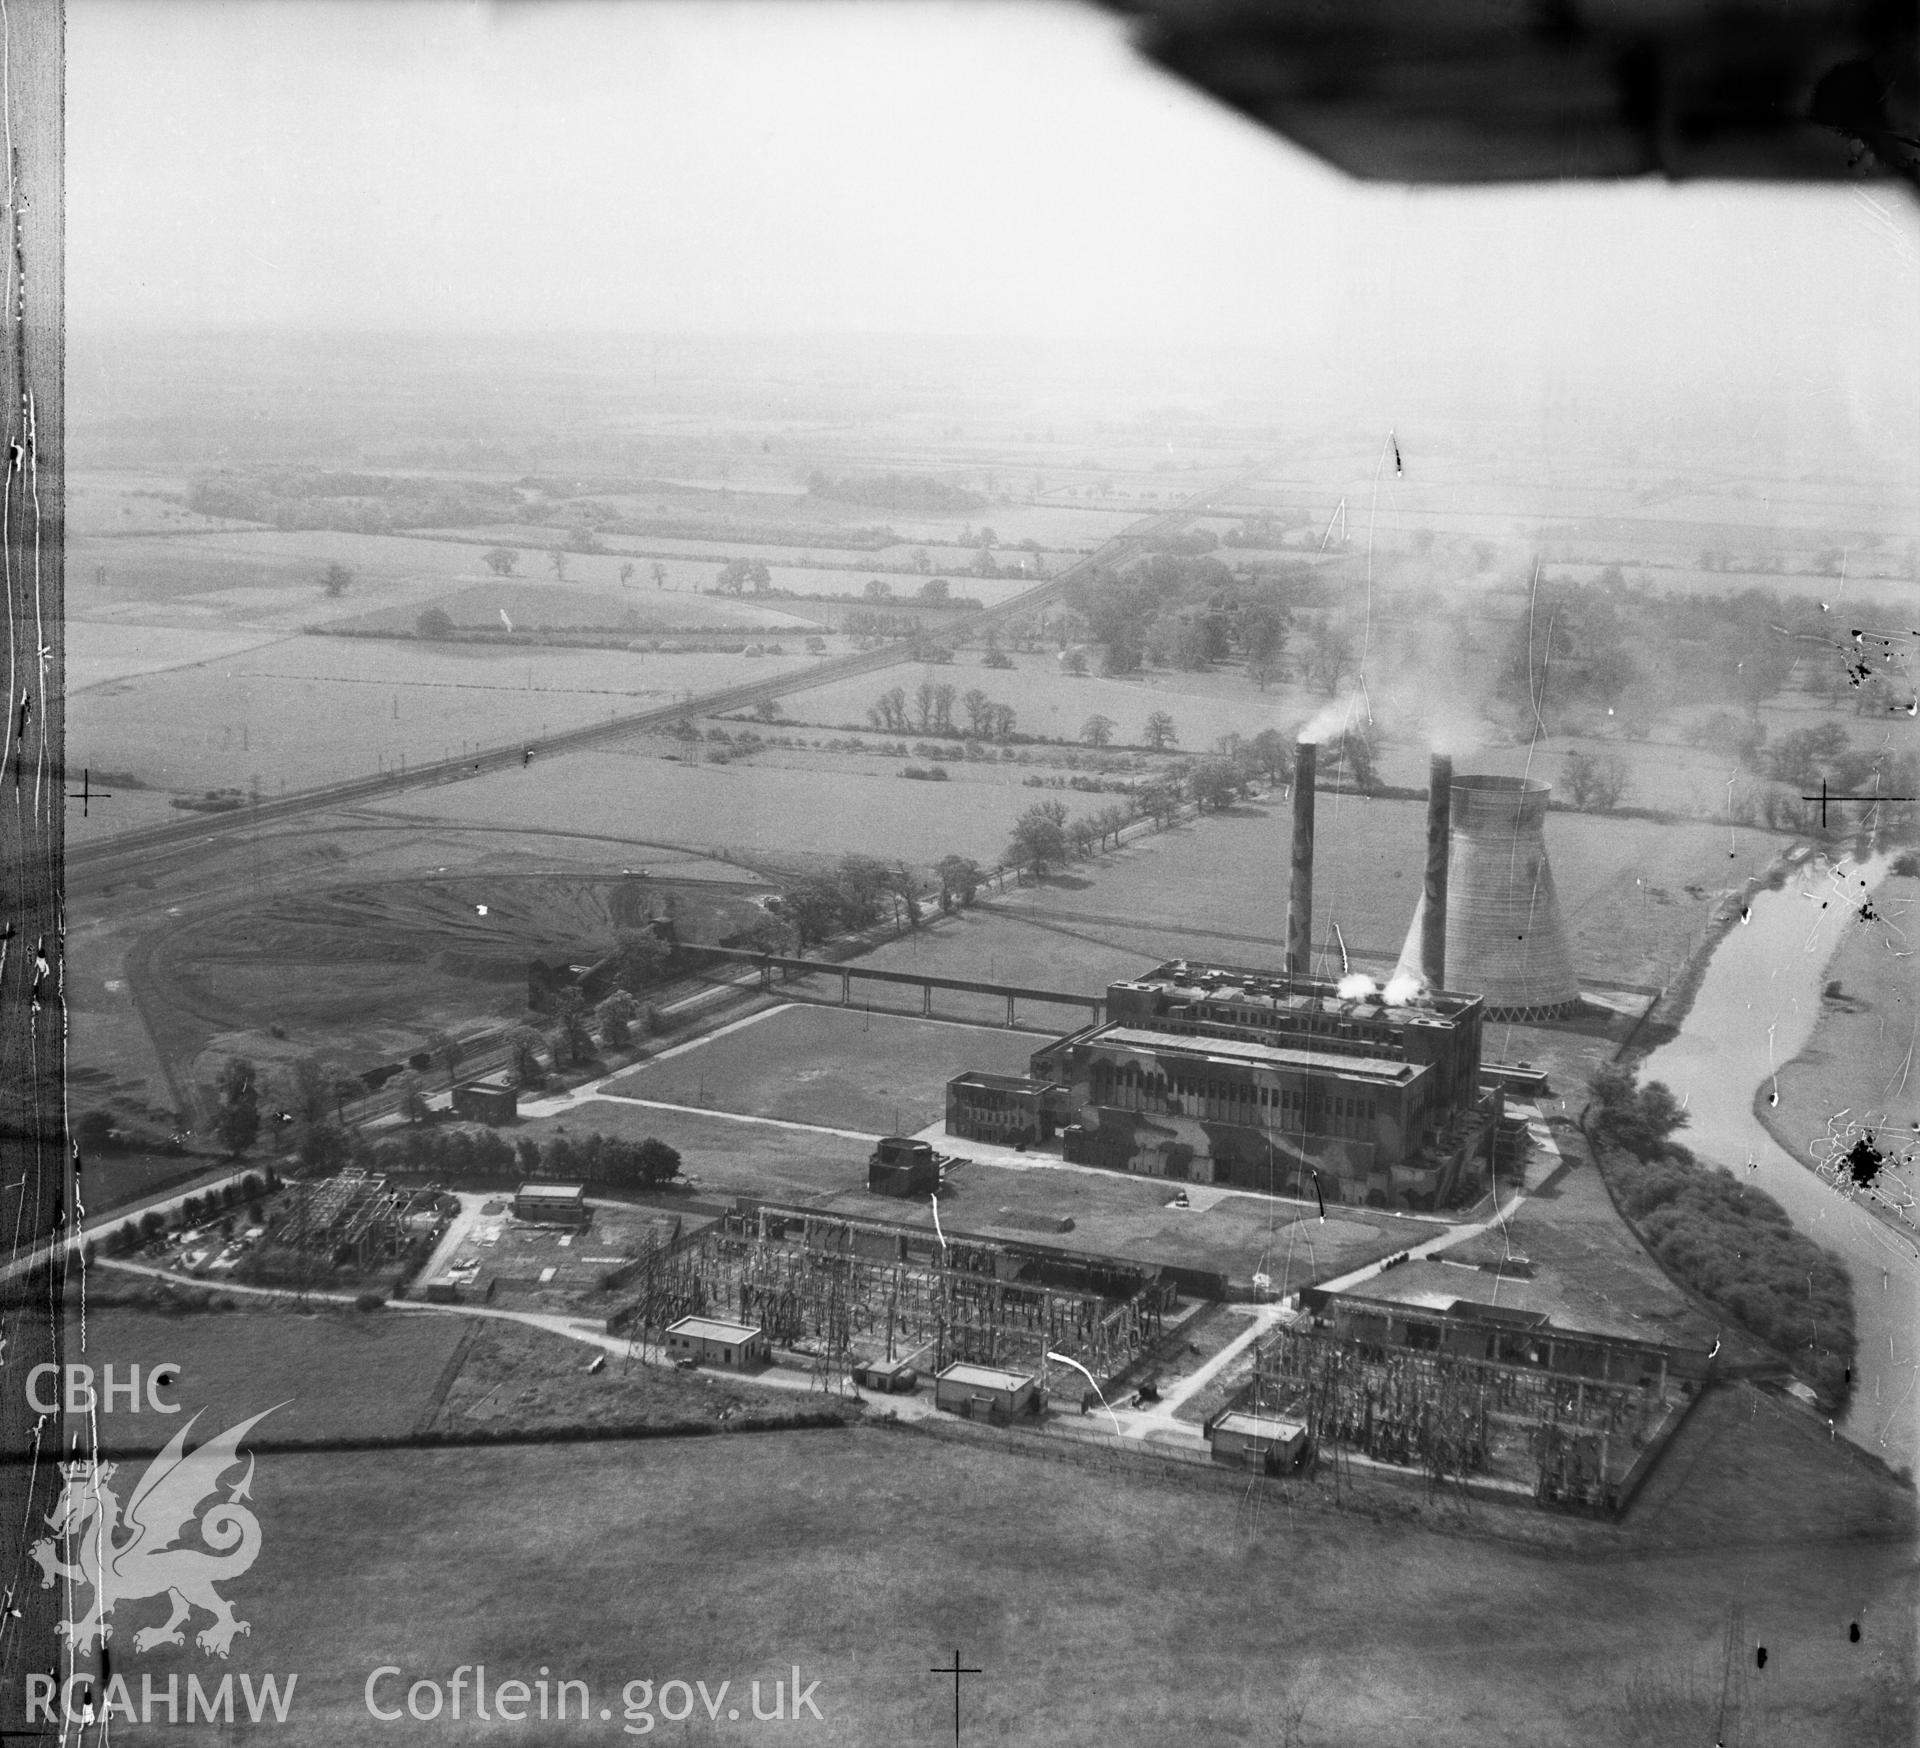 View labelled "South Wales Electric D".  The whereabouts of this site is presently unknown.